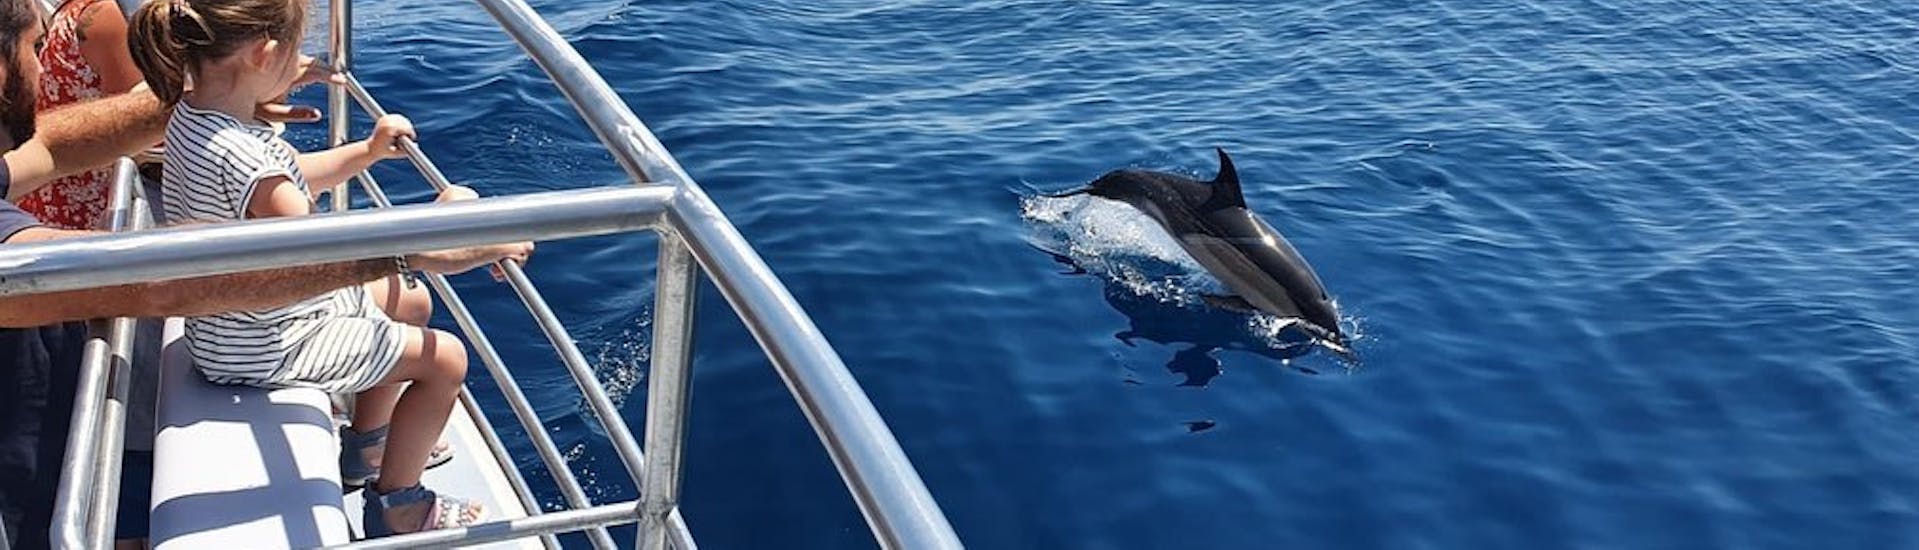 A dolphin close to the catamaran during the Catamaran Trip with dolphin watching from Lagos.